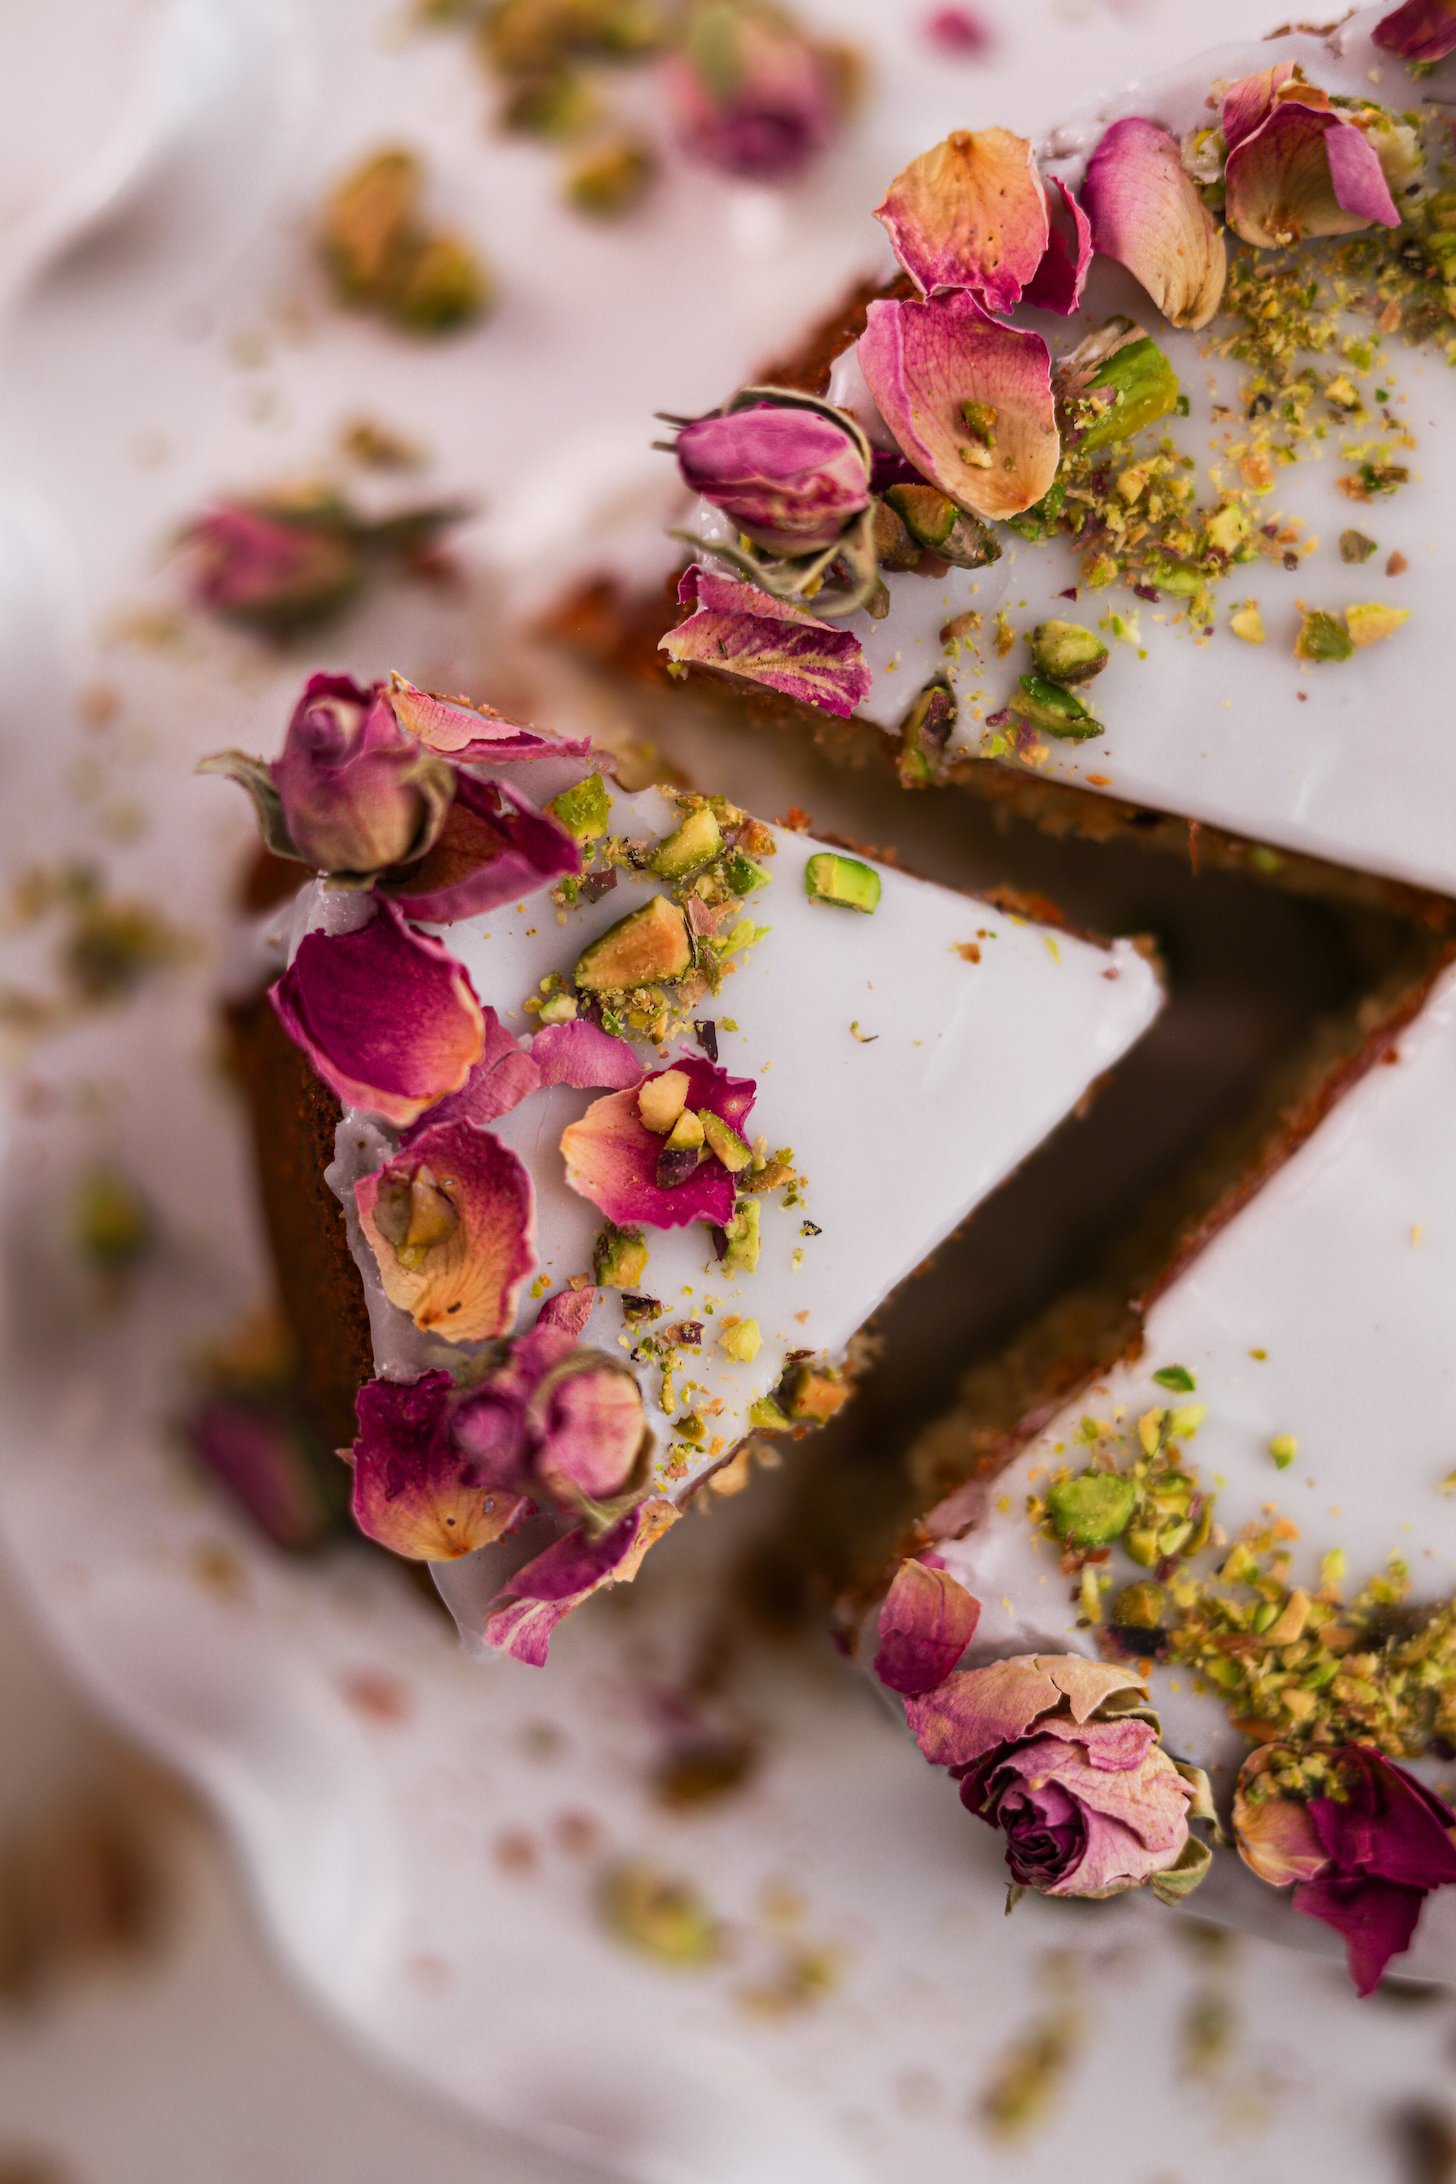 The close up top-down snapshot displays a cake featuring white icing, dried roses, and crushed pistachios on top. A slice is pulled out.